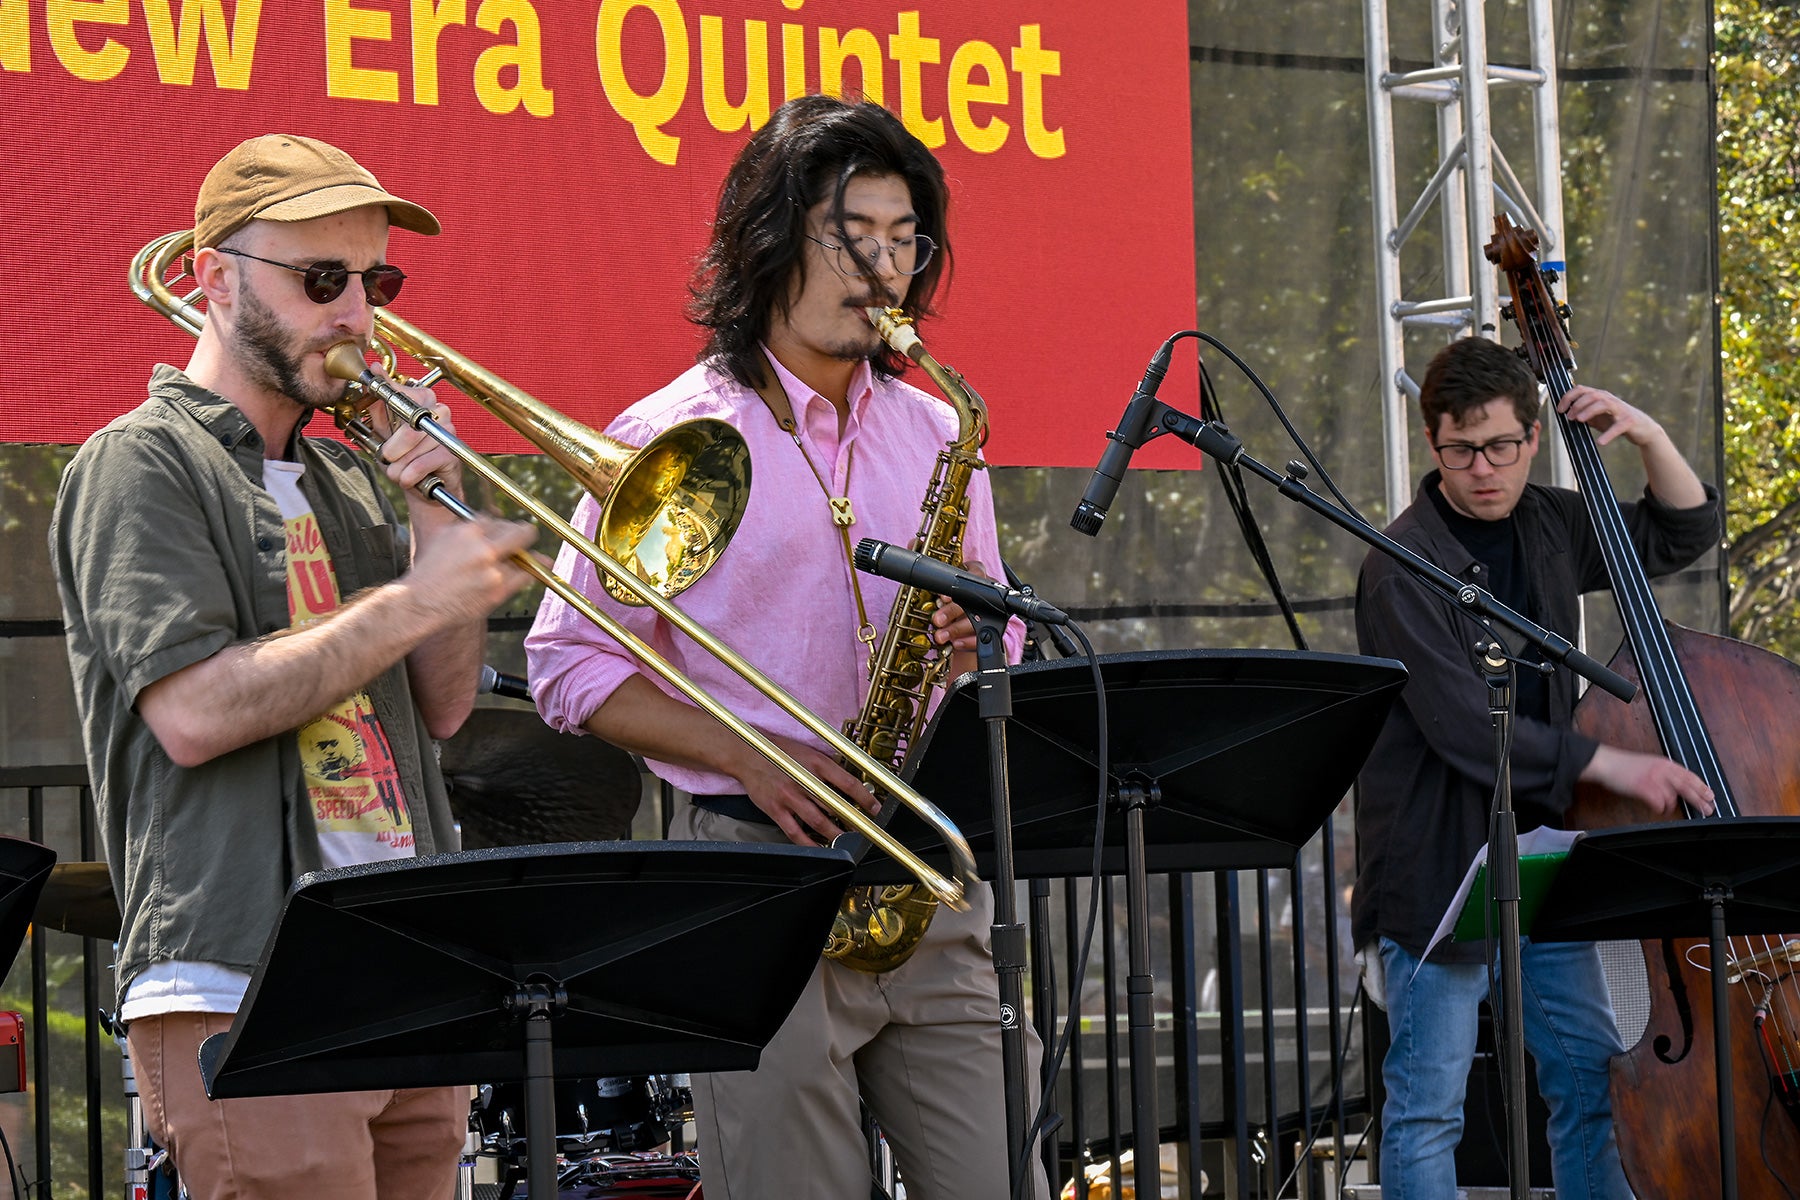 Los Angeles Times Festival of Books at USC: Marcello Carelli and the New Era Quintet